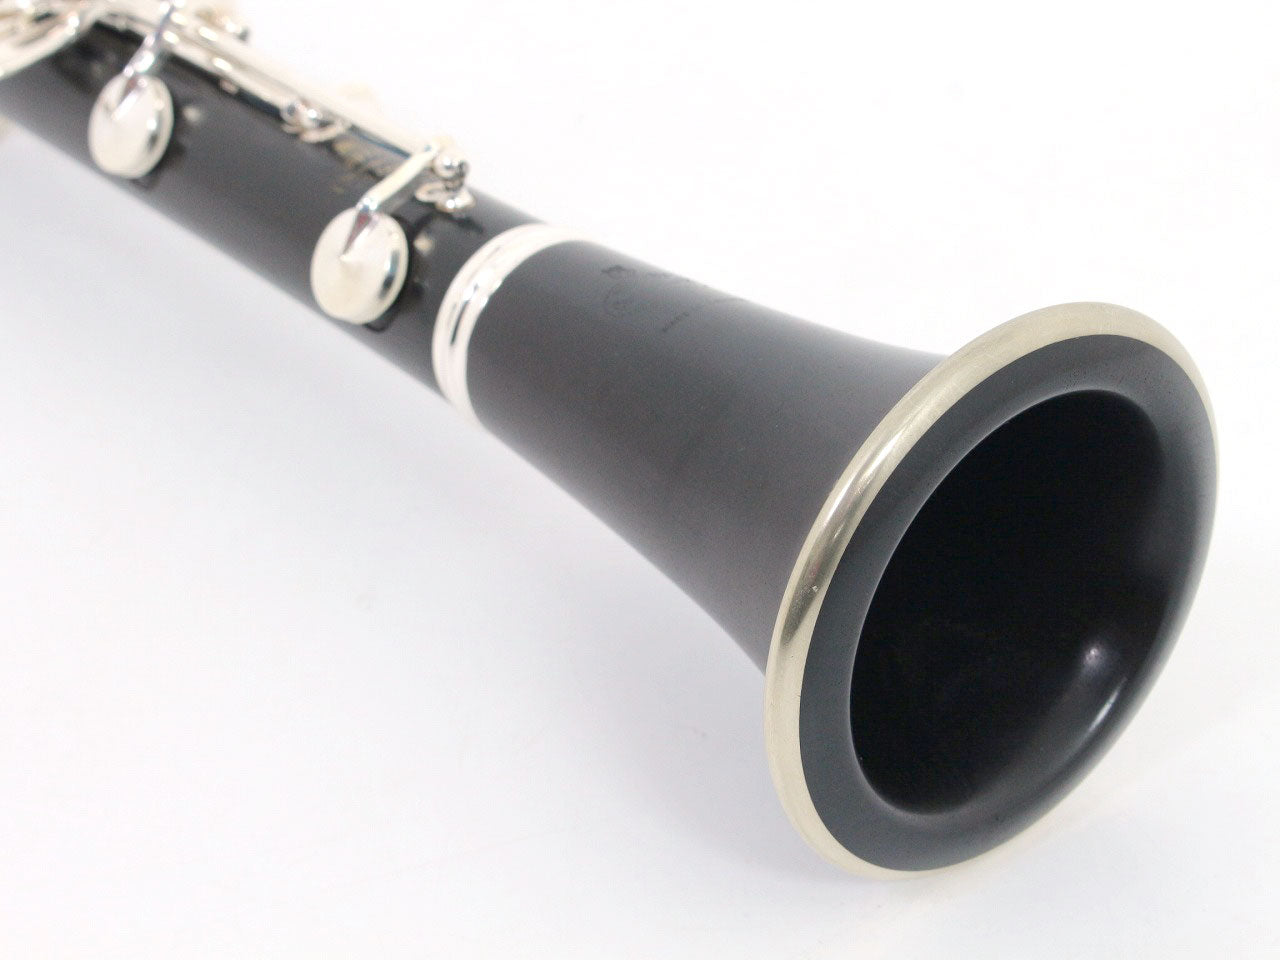 [SN K231298] USED Buffet Crampon / B flat clarinet E13 SP, all tampos replaced [09]